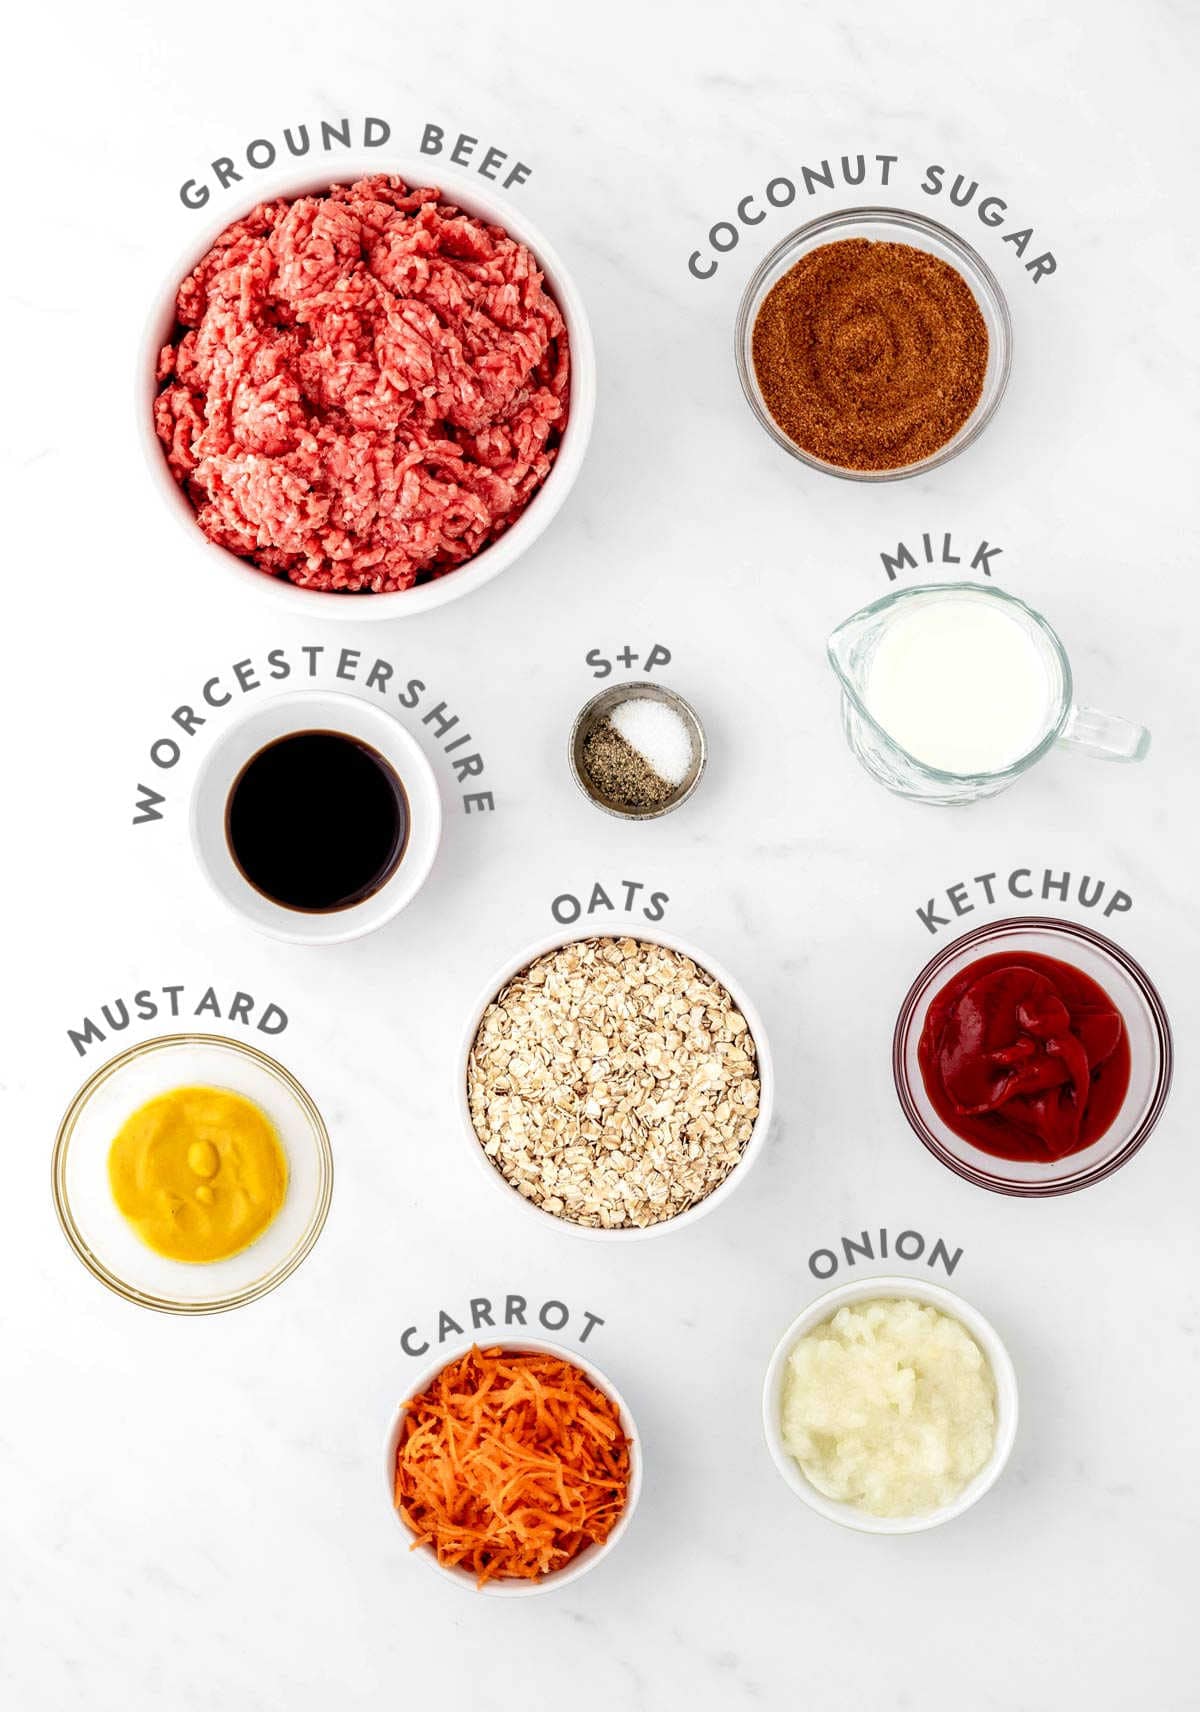 Ingredients required for mini meatloaf recipe without eggs.